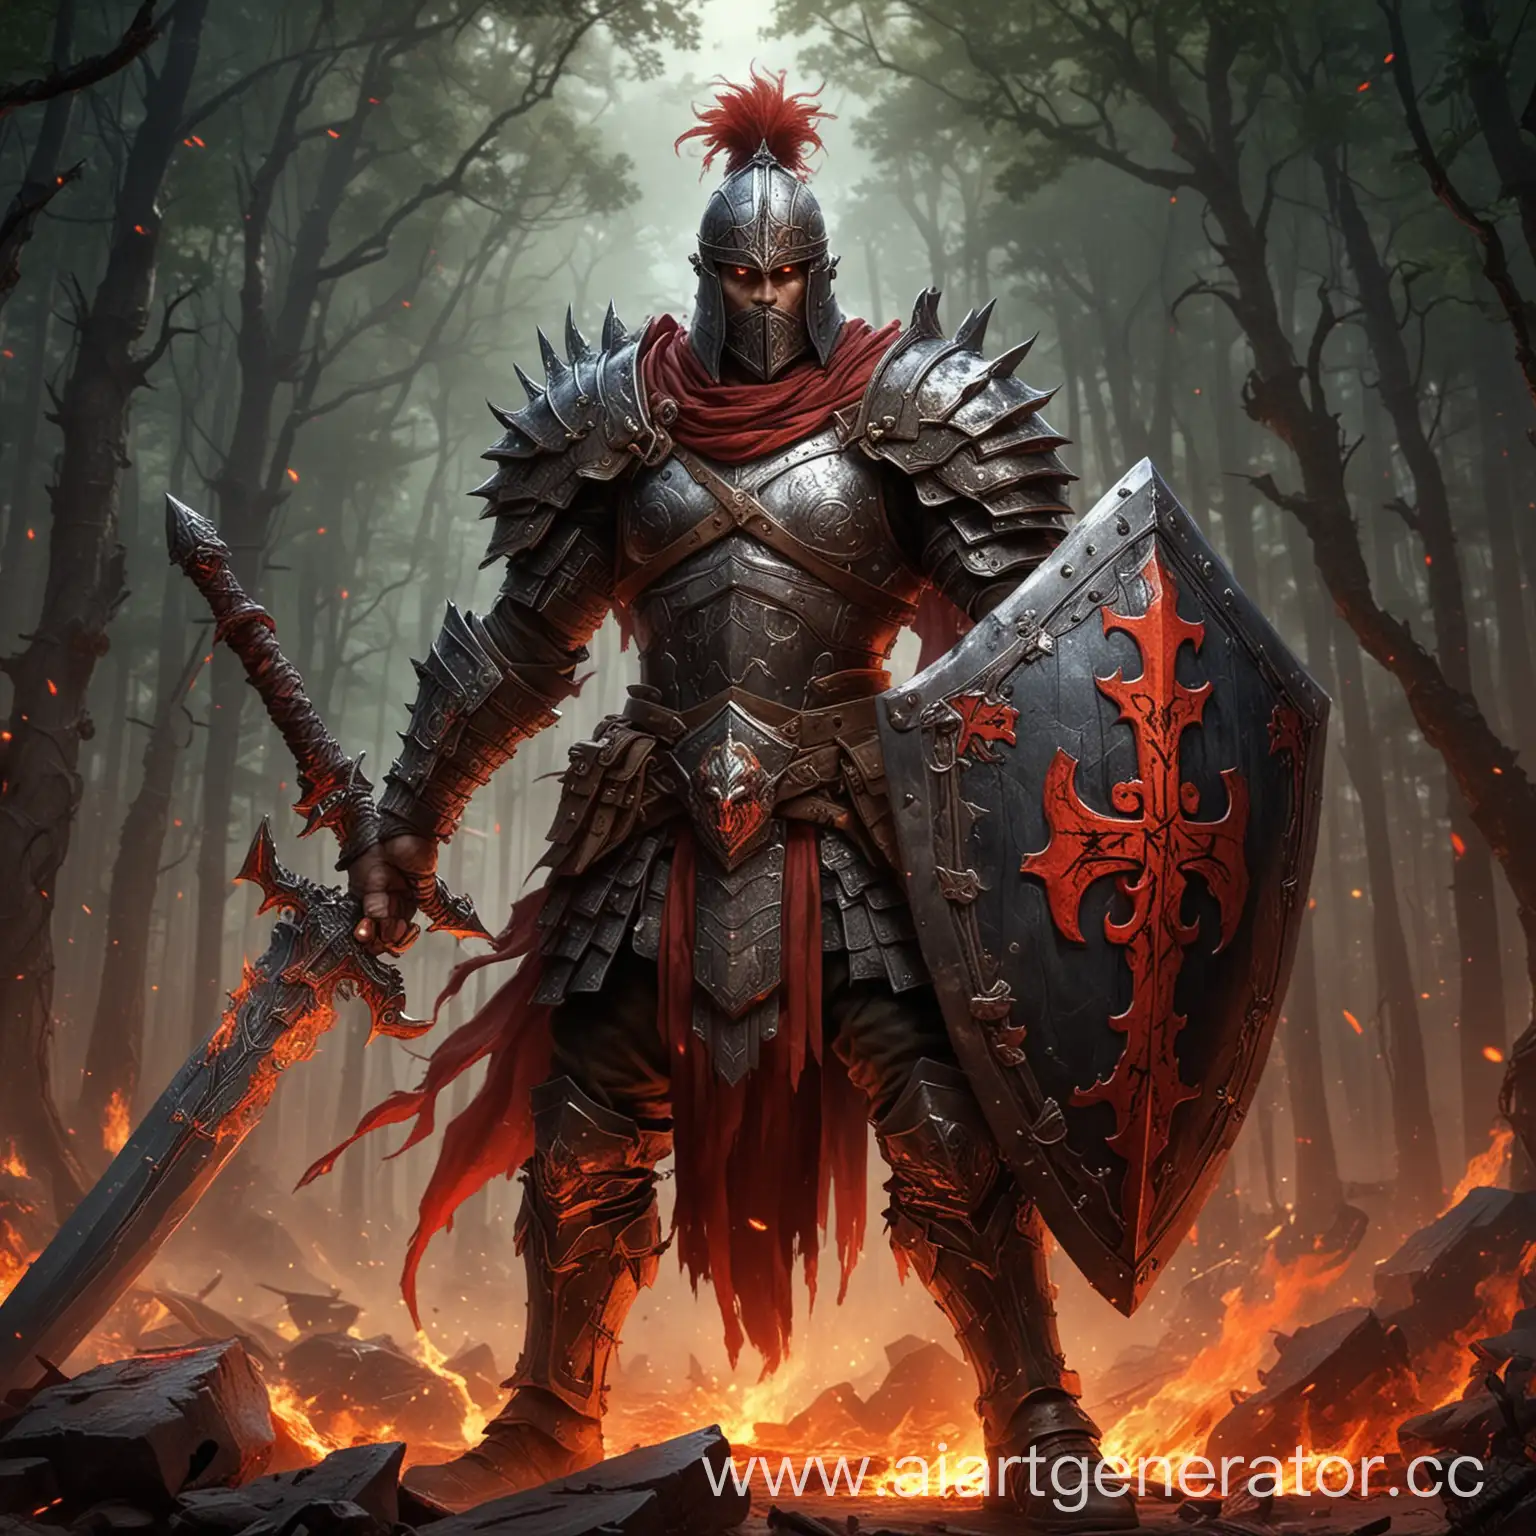 Majestic-Warrior-in-Ancient-Runed-Armor-Holding-Sword-and-Shield